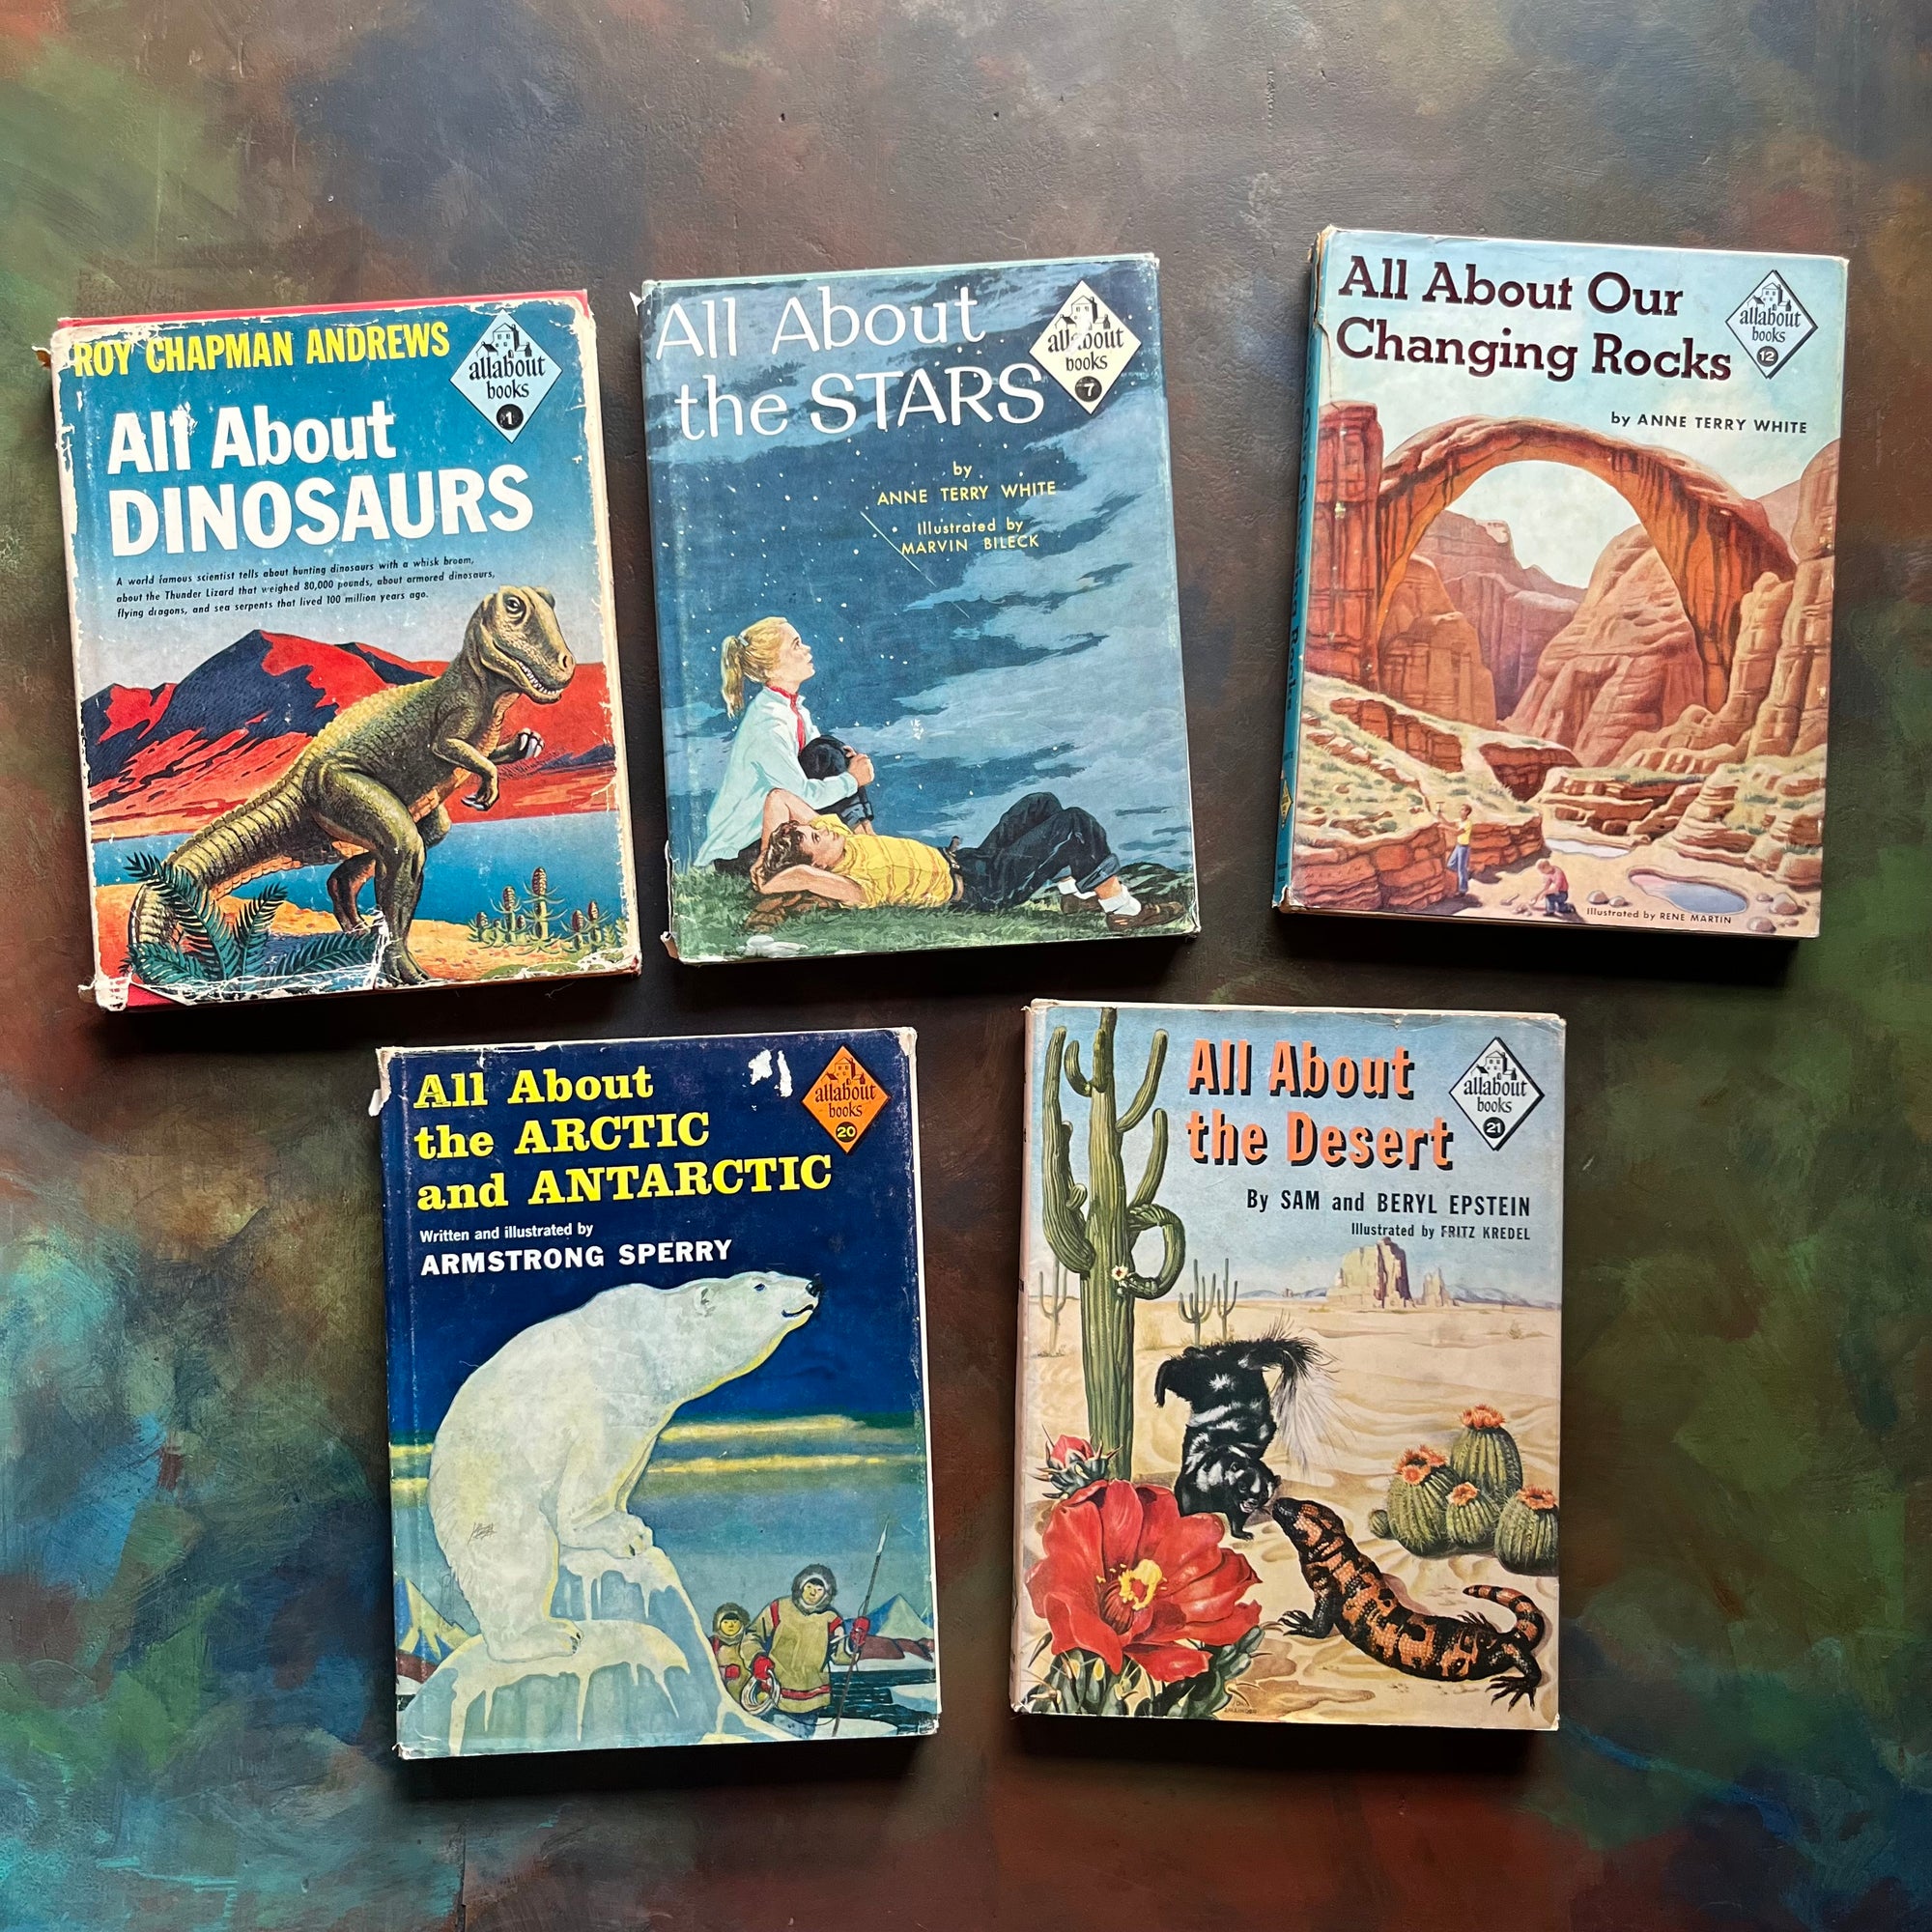 Set of 5 All About Books-Dinosaurs, Stars, Changing Rocks, Arctic & Antarctic, and The Desert-vintage science books for kids-view of the dust jacket's front covers with colorful illustrations